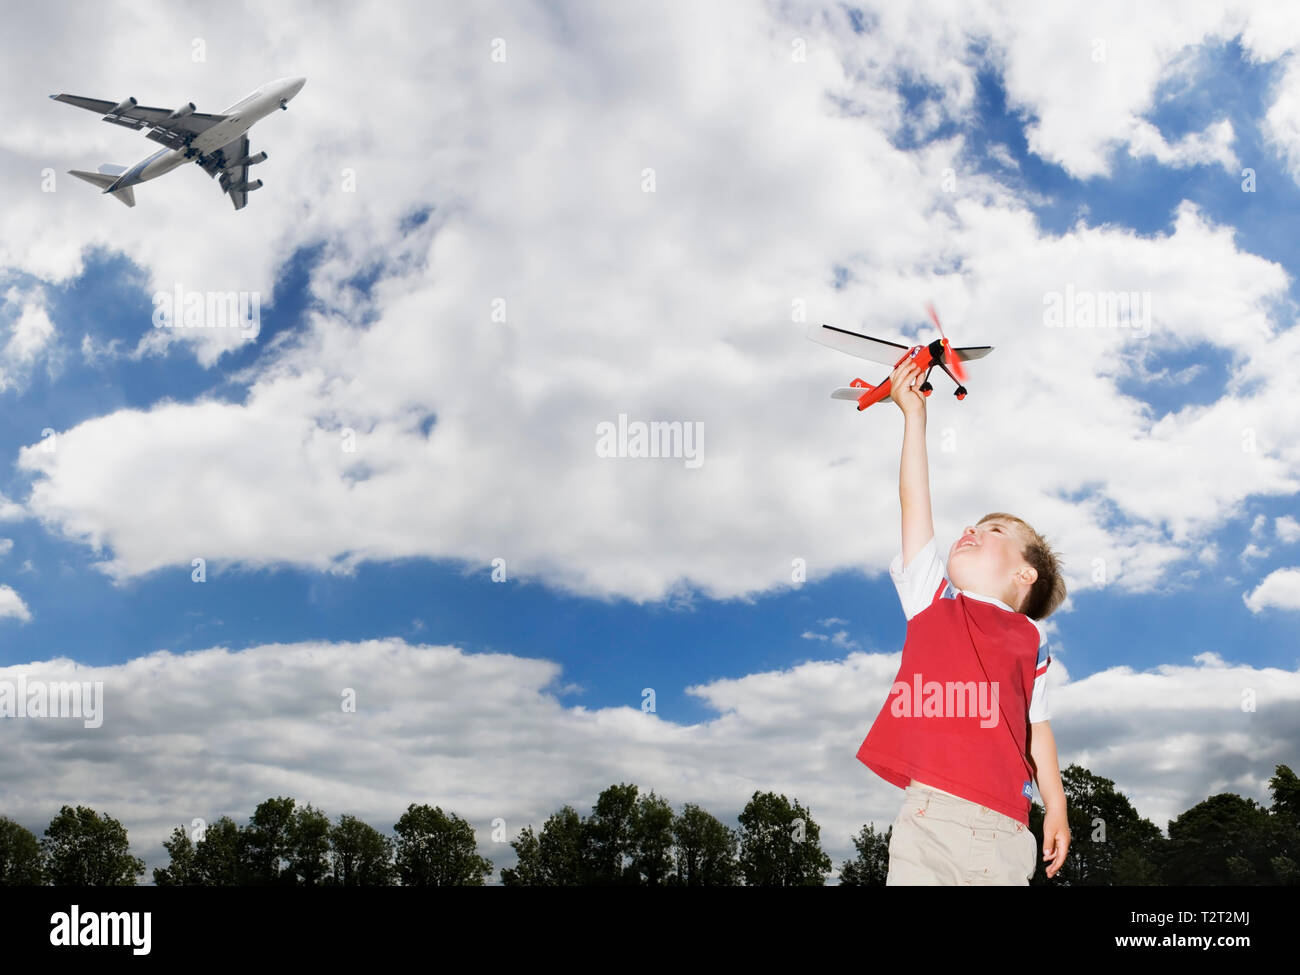 Young caucasian boy playing with a toy plane as a passenger plane flies overhead Stock Photo